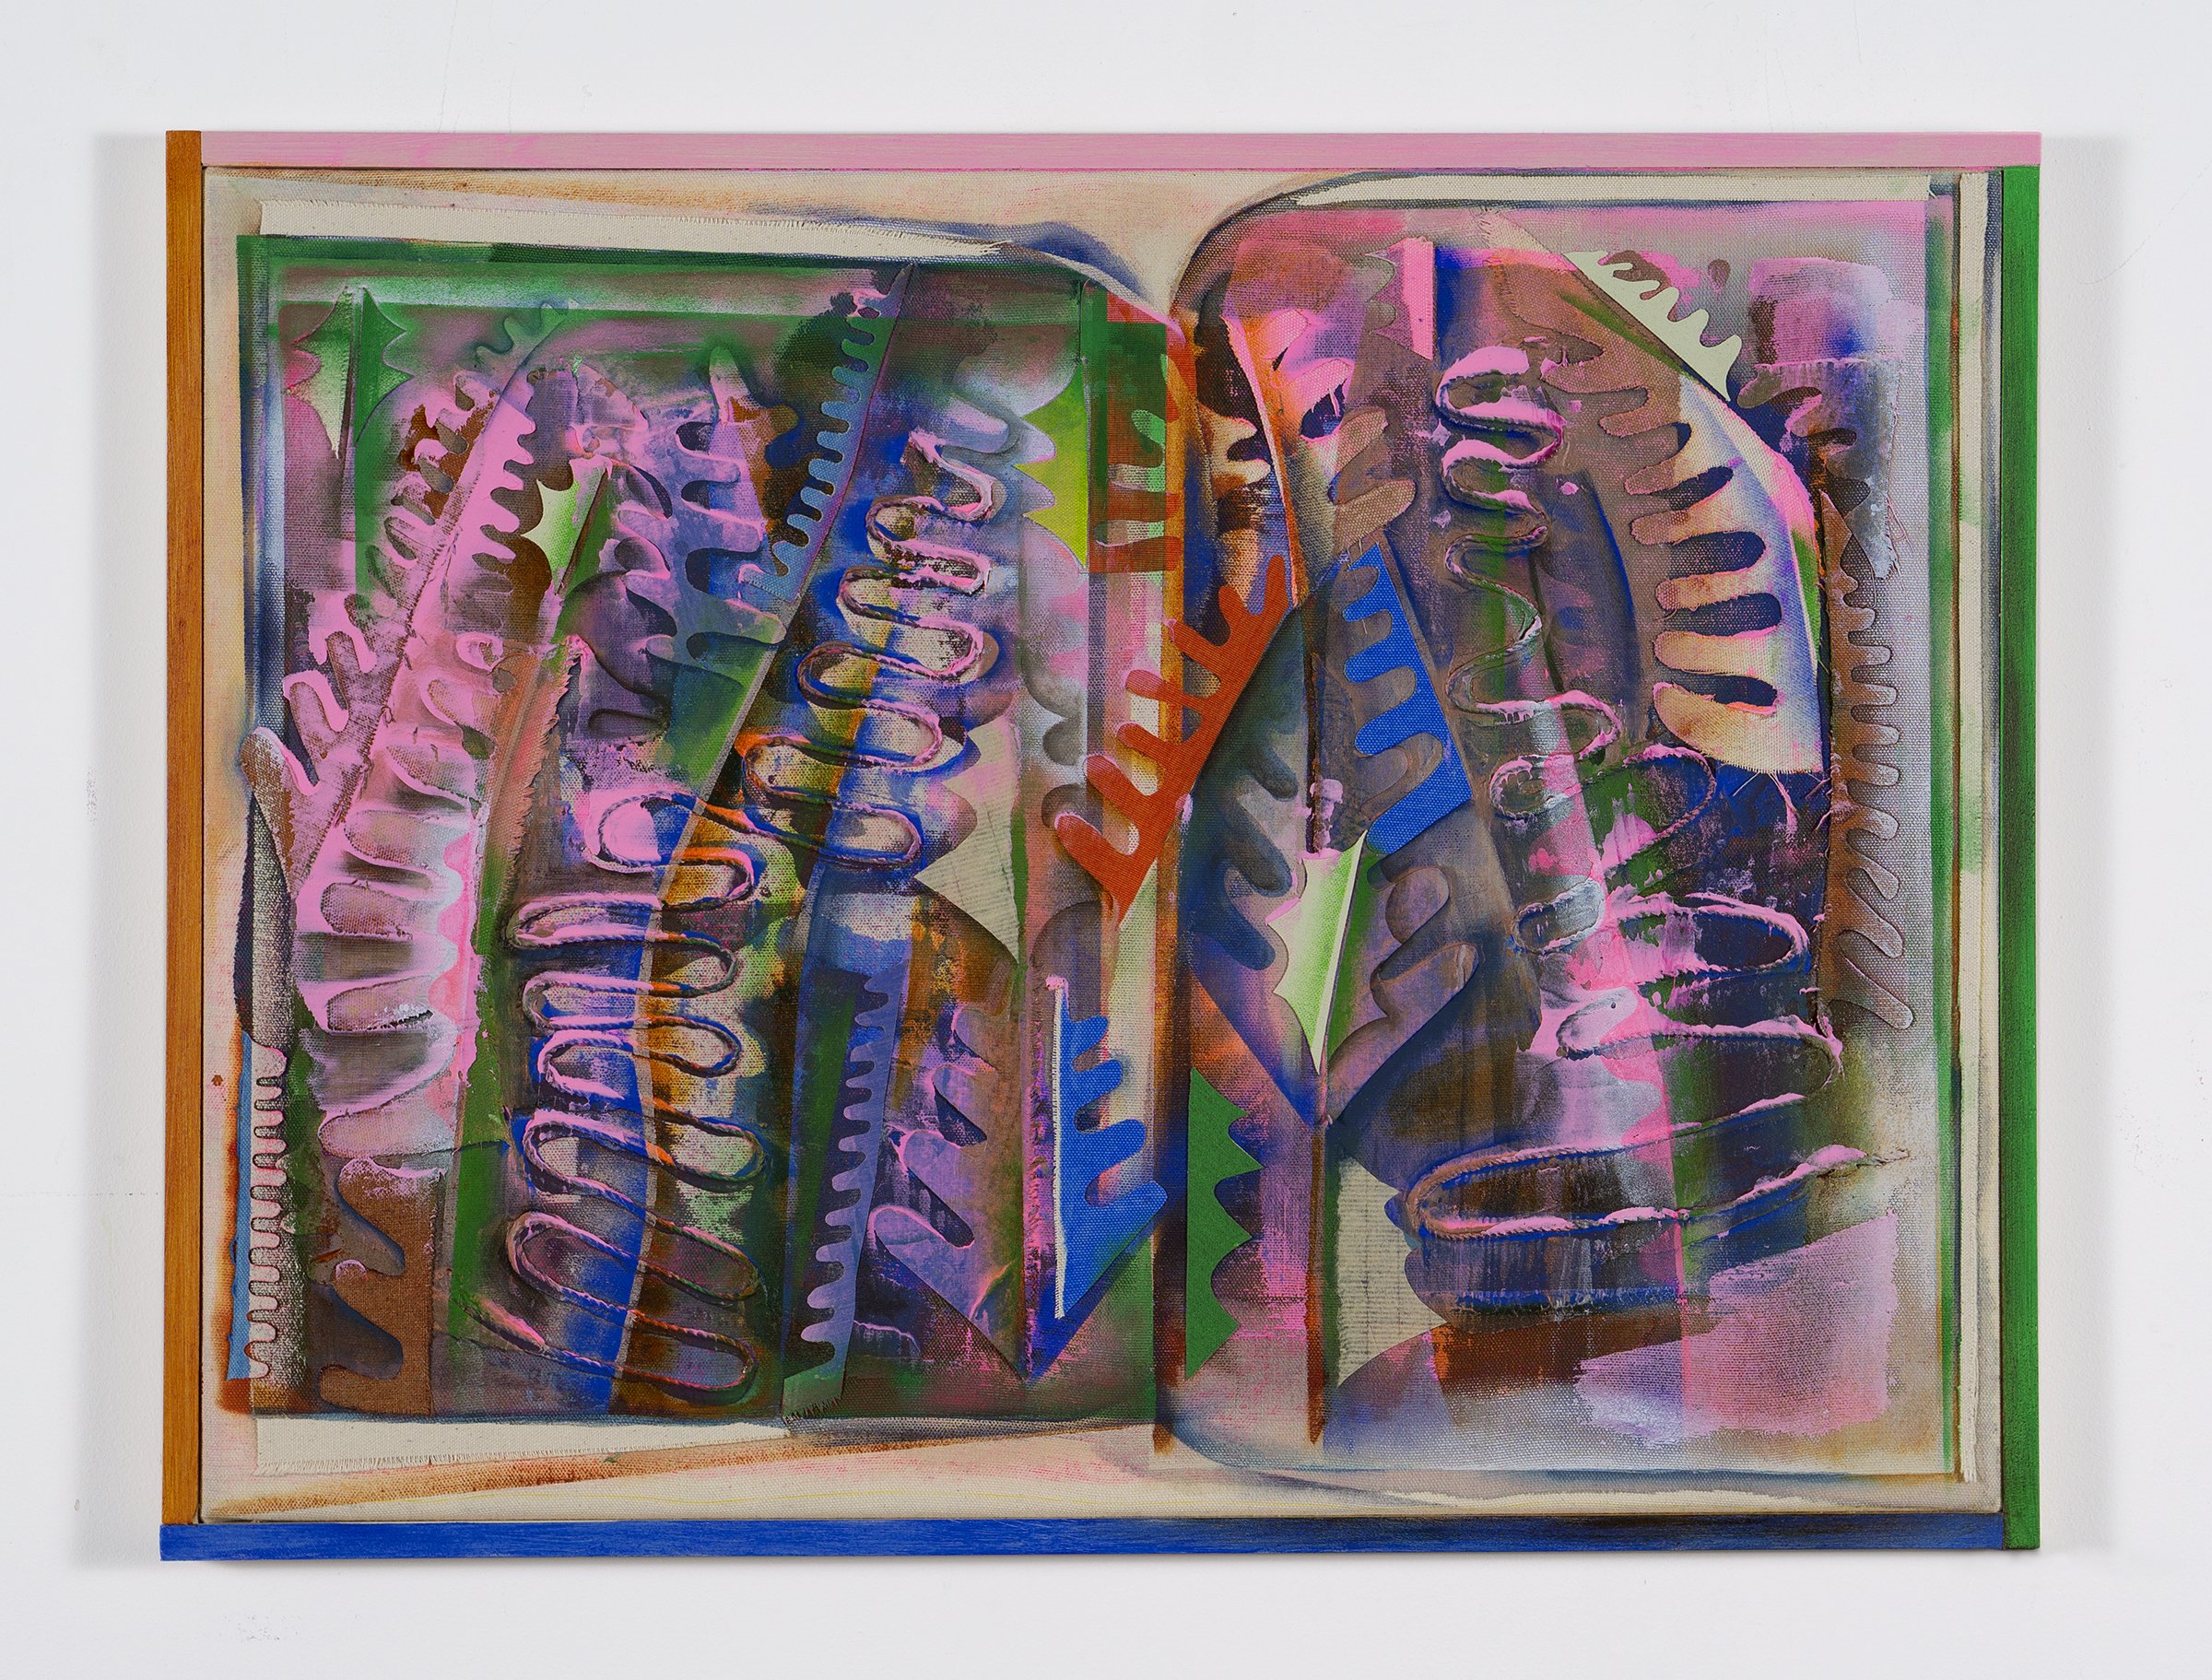  Melissa Oresky "Turning In" / 2021 / Acrylic, collage, and wax pastel on canvas, artist's frame / 19 x 25" / $2800 